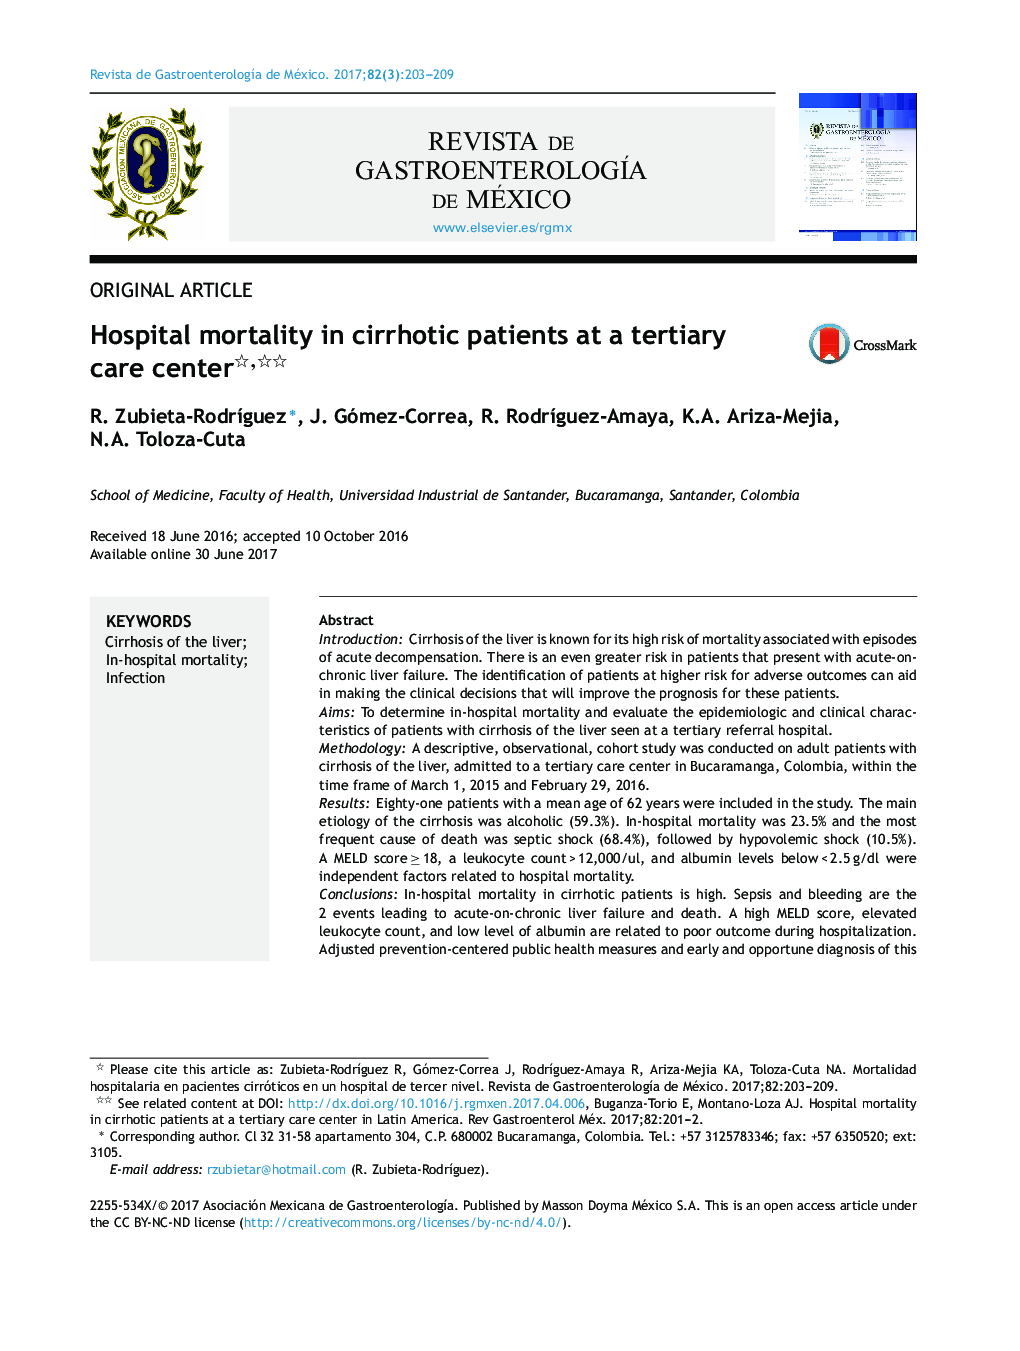 Hospital mortality in cirrhotic patients at a tertiary care center